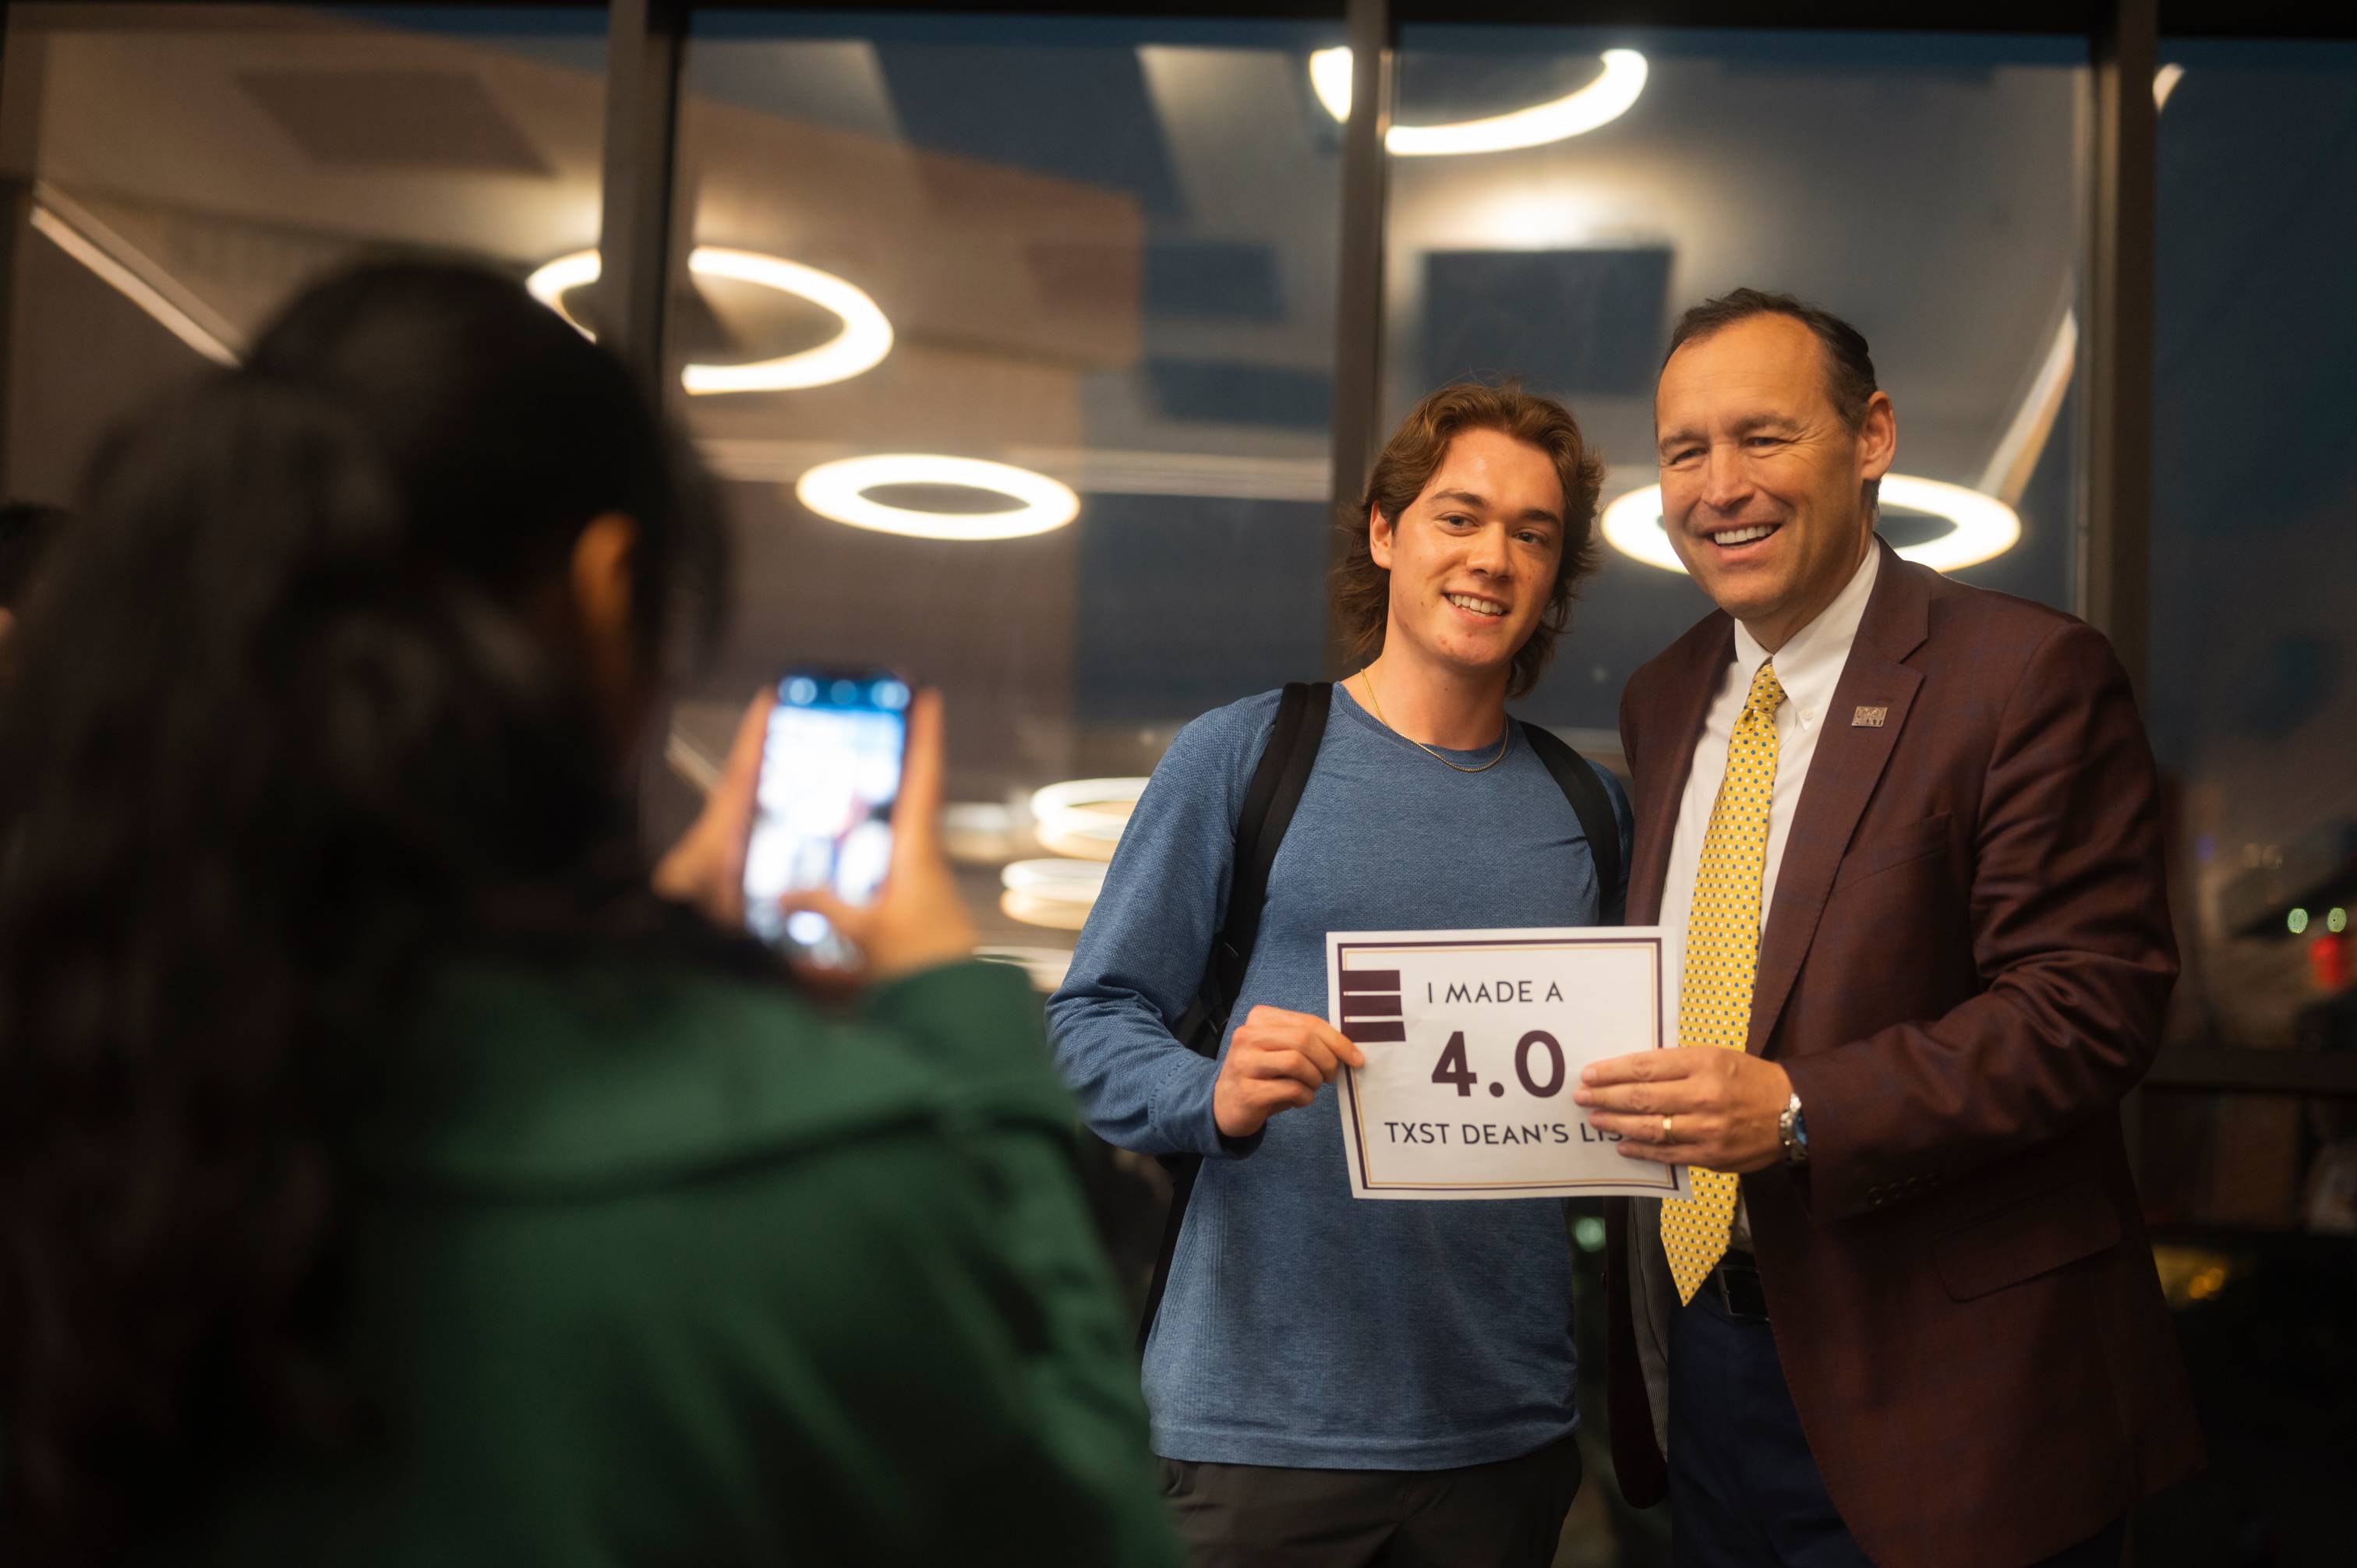 Student holding a sign that says "I got a 4.0" and posing with President Kelly Damphousse.